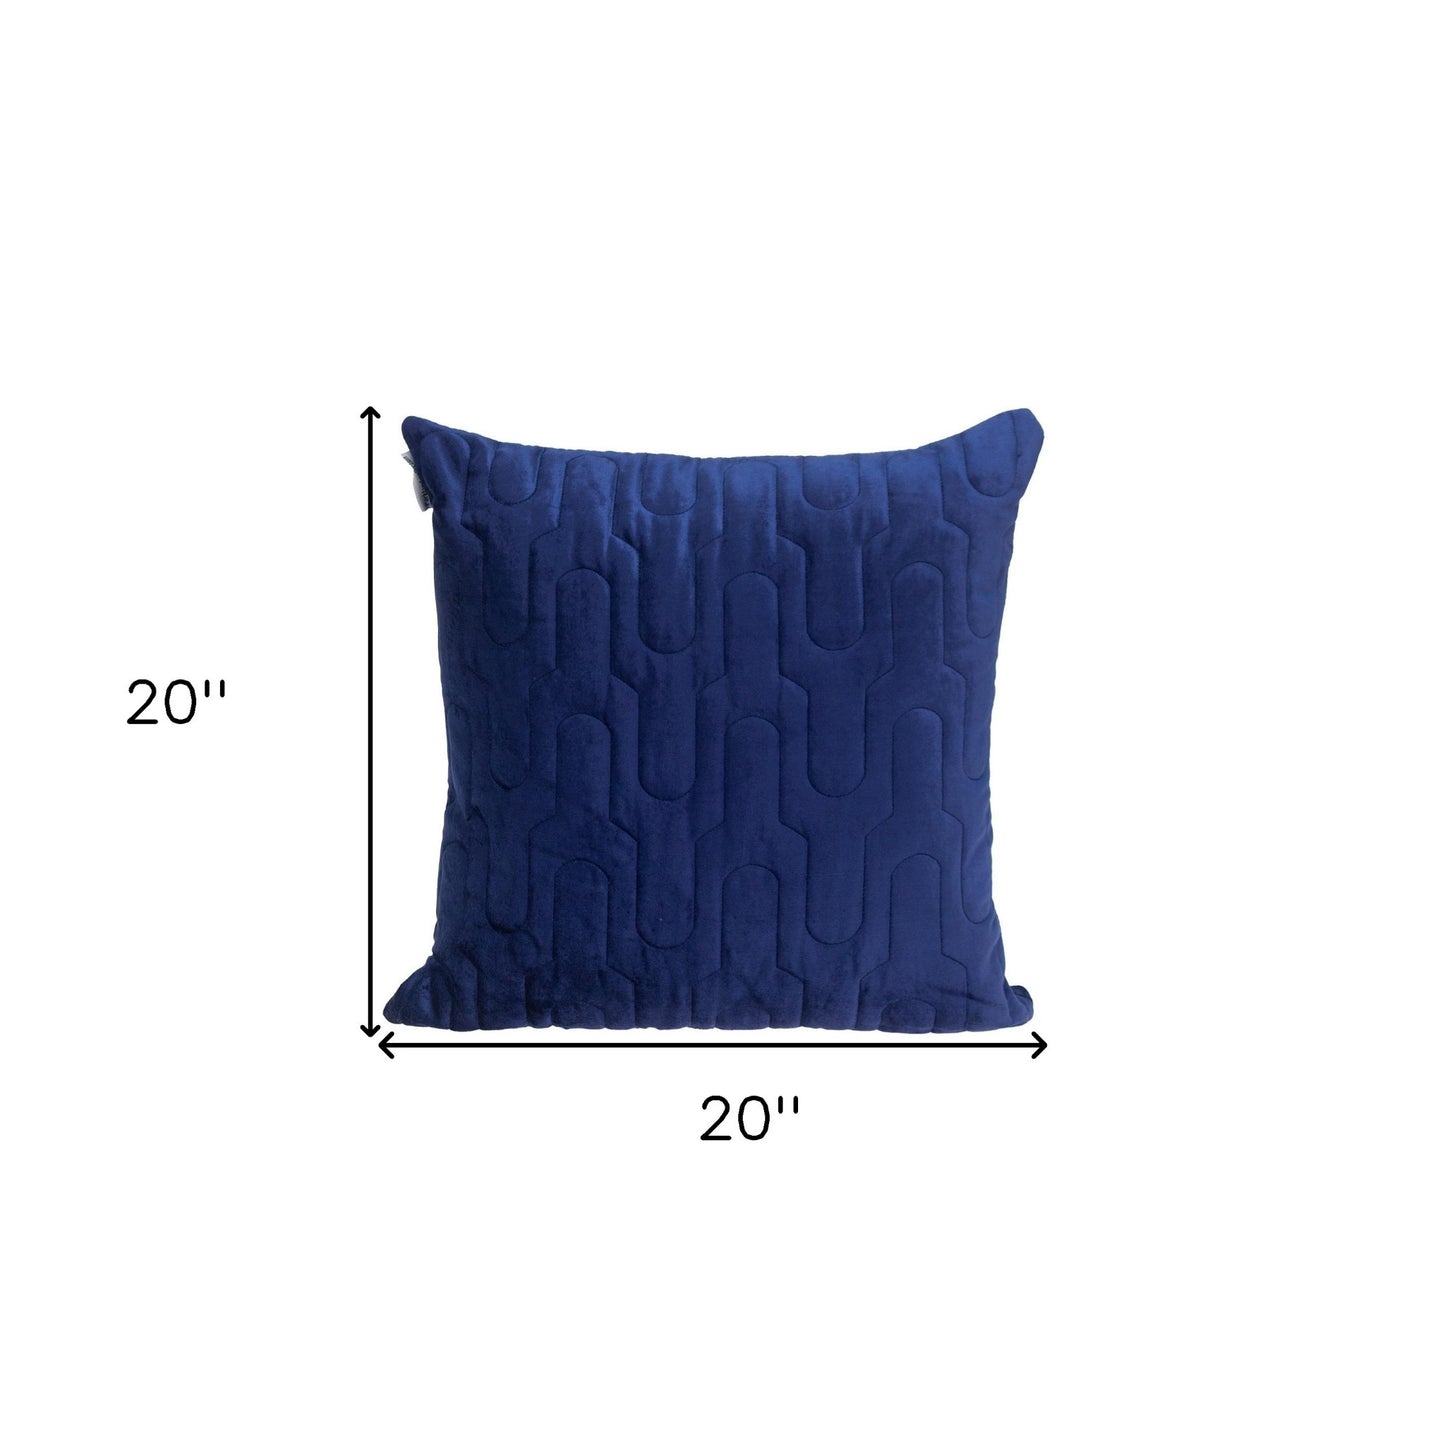 Geometric Lush Quilted Blue Throw Pillow